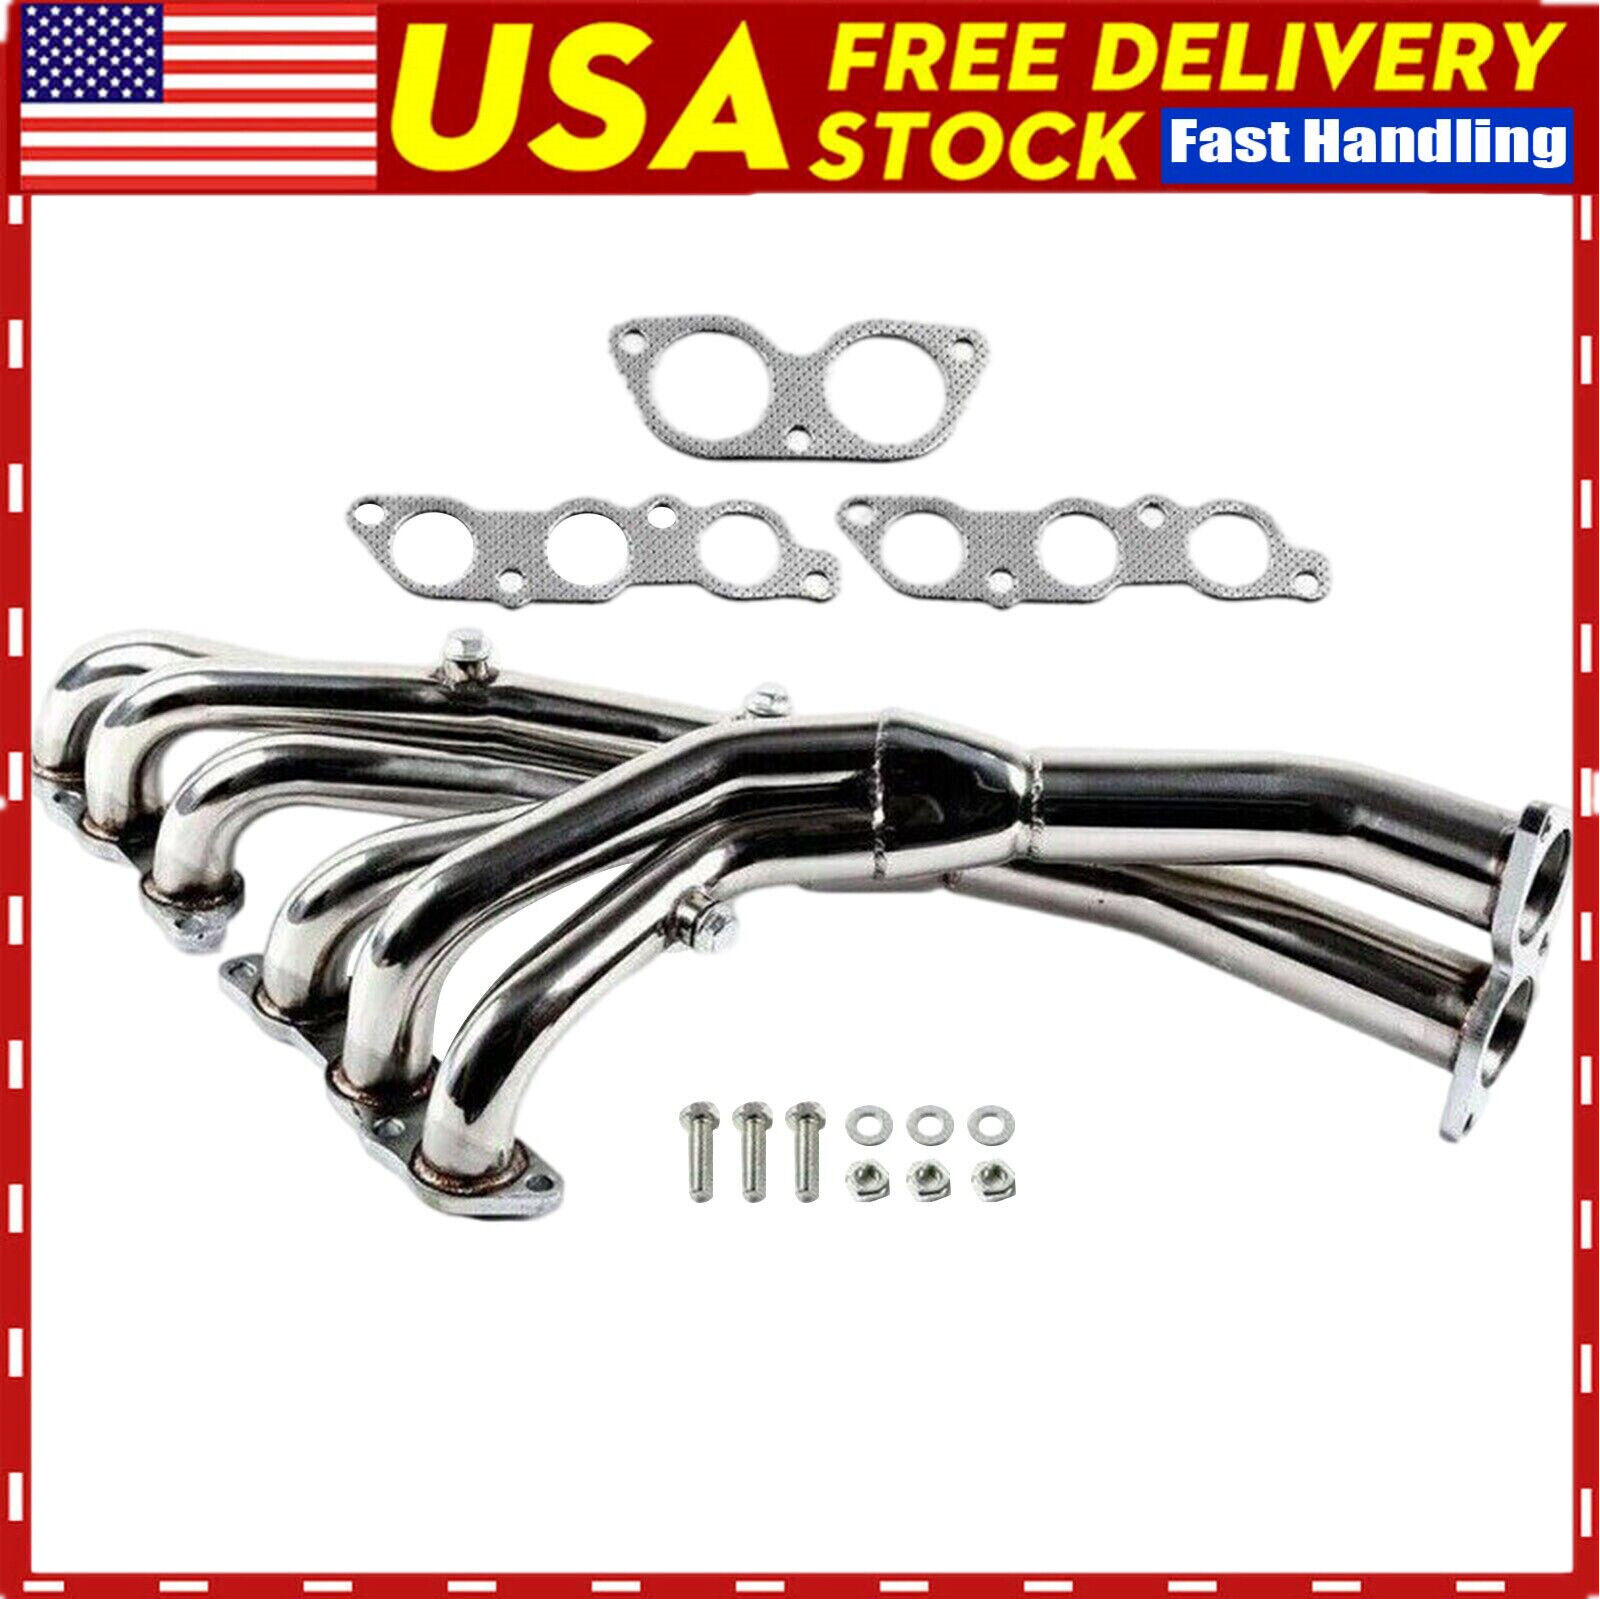 Stainless Steel Manifold Header for 01-05 Lexus IS300 01-05 3.0L 2JX-GE